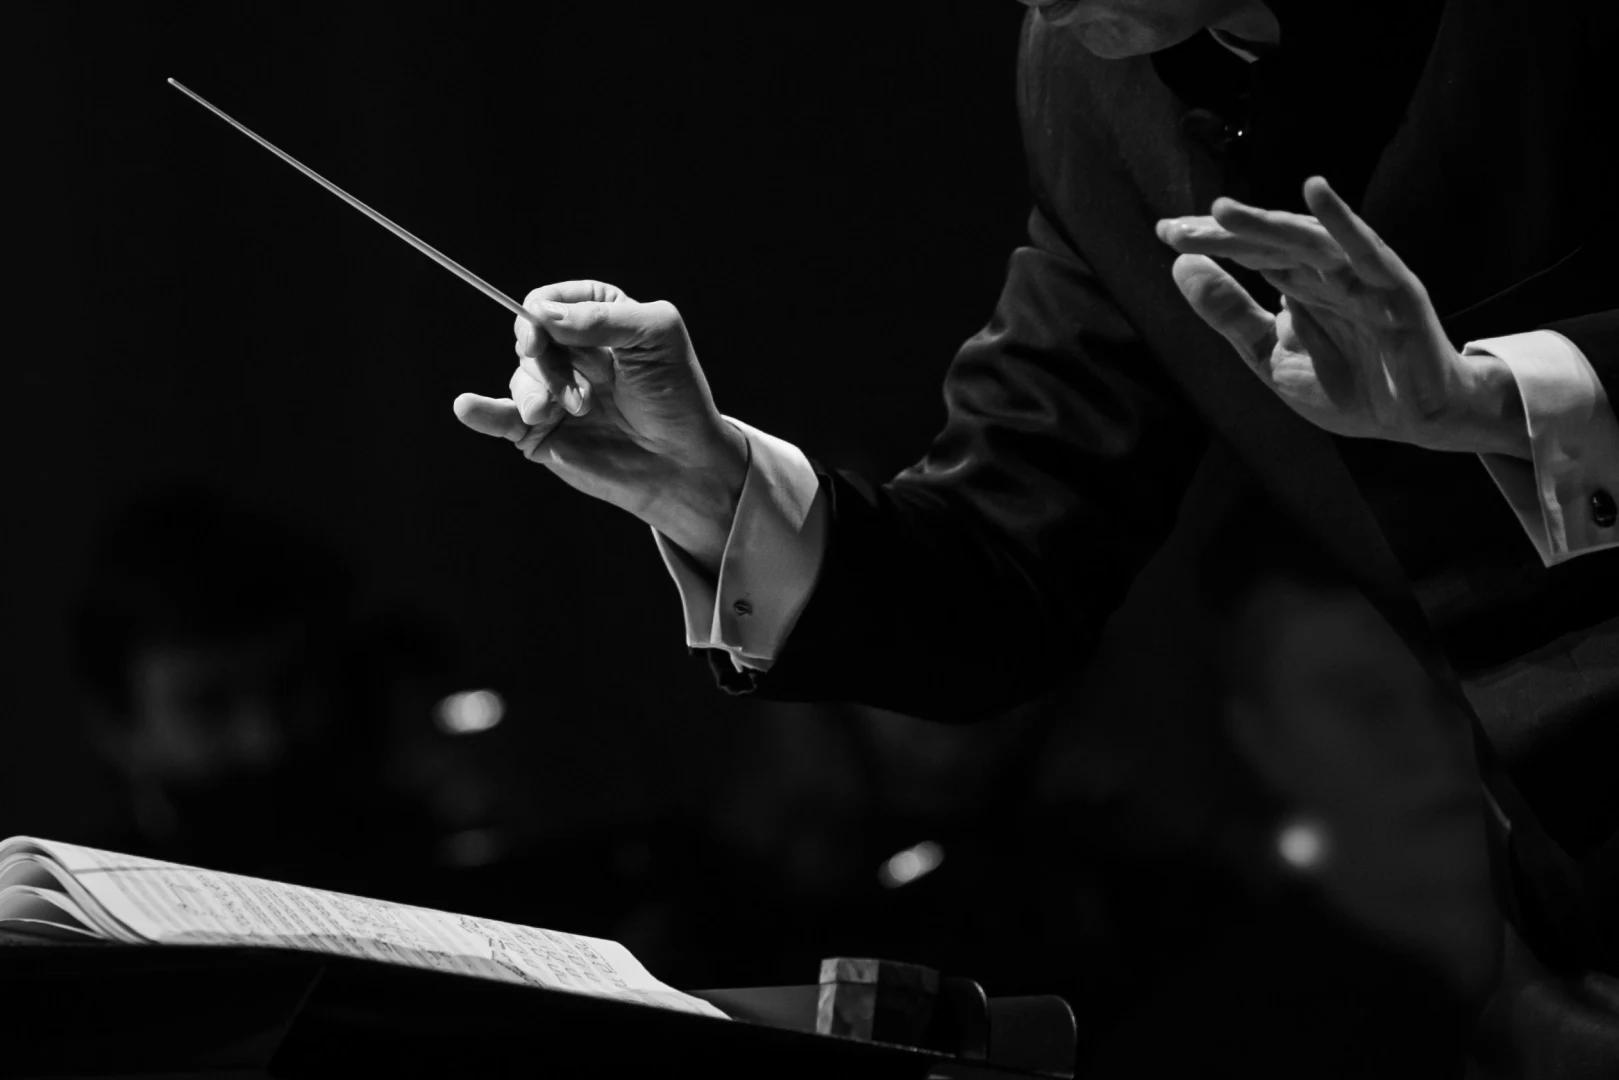 Conductor collapses mid-performance, dies from ‘collapsing’